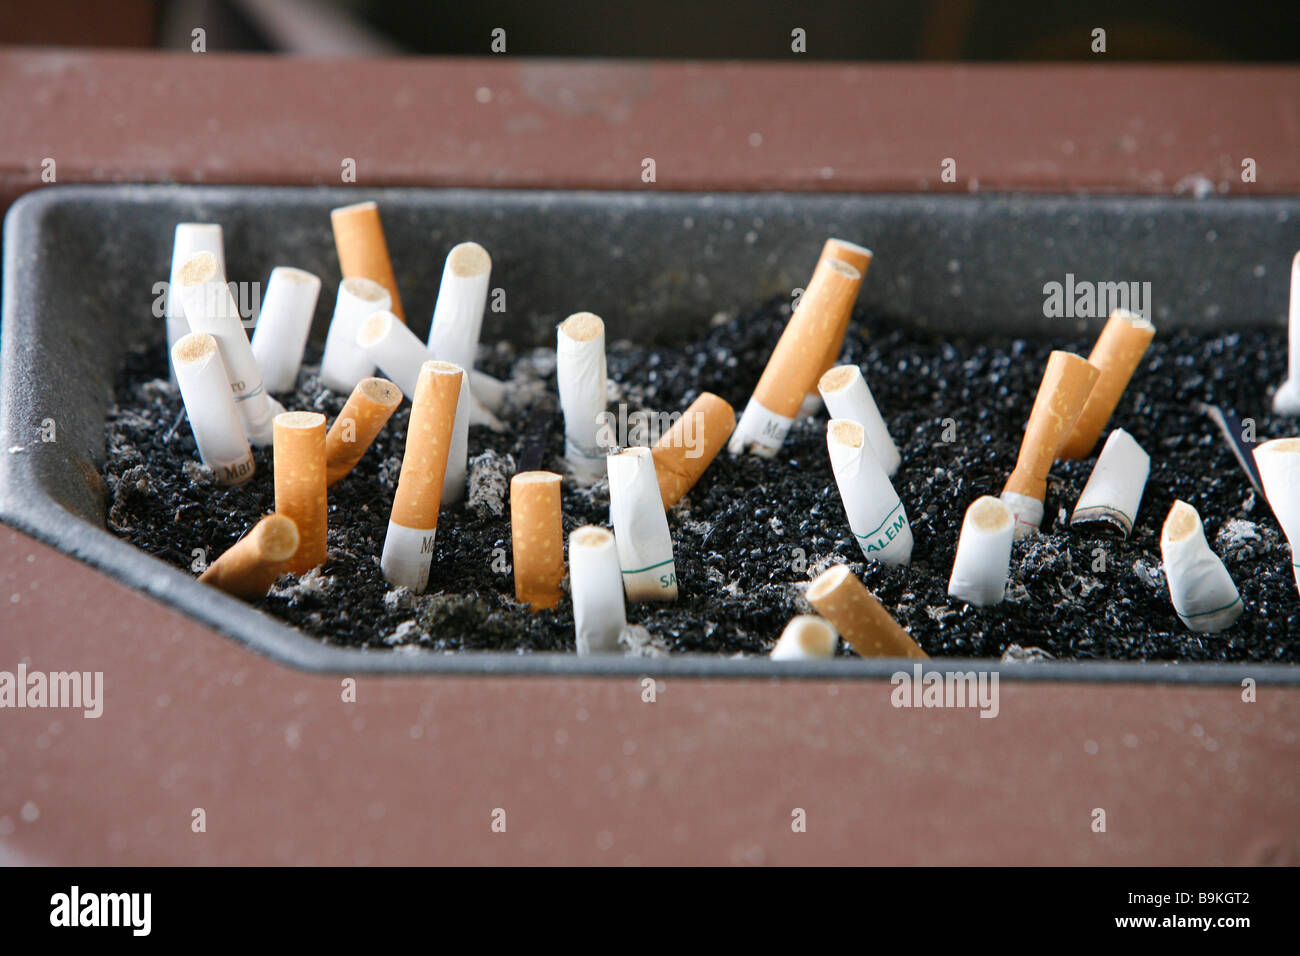 Cigarette butts in ashtray smoking nicotine cigar Stock Photo